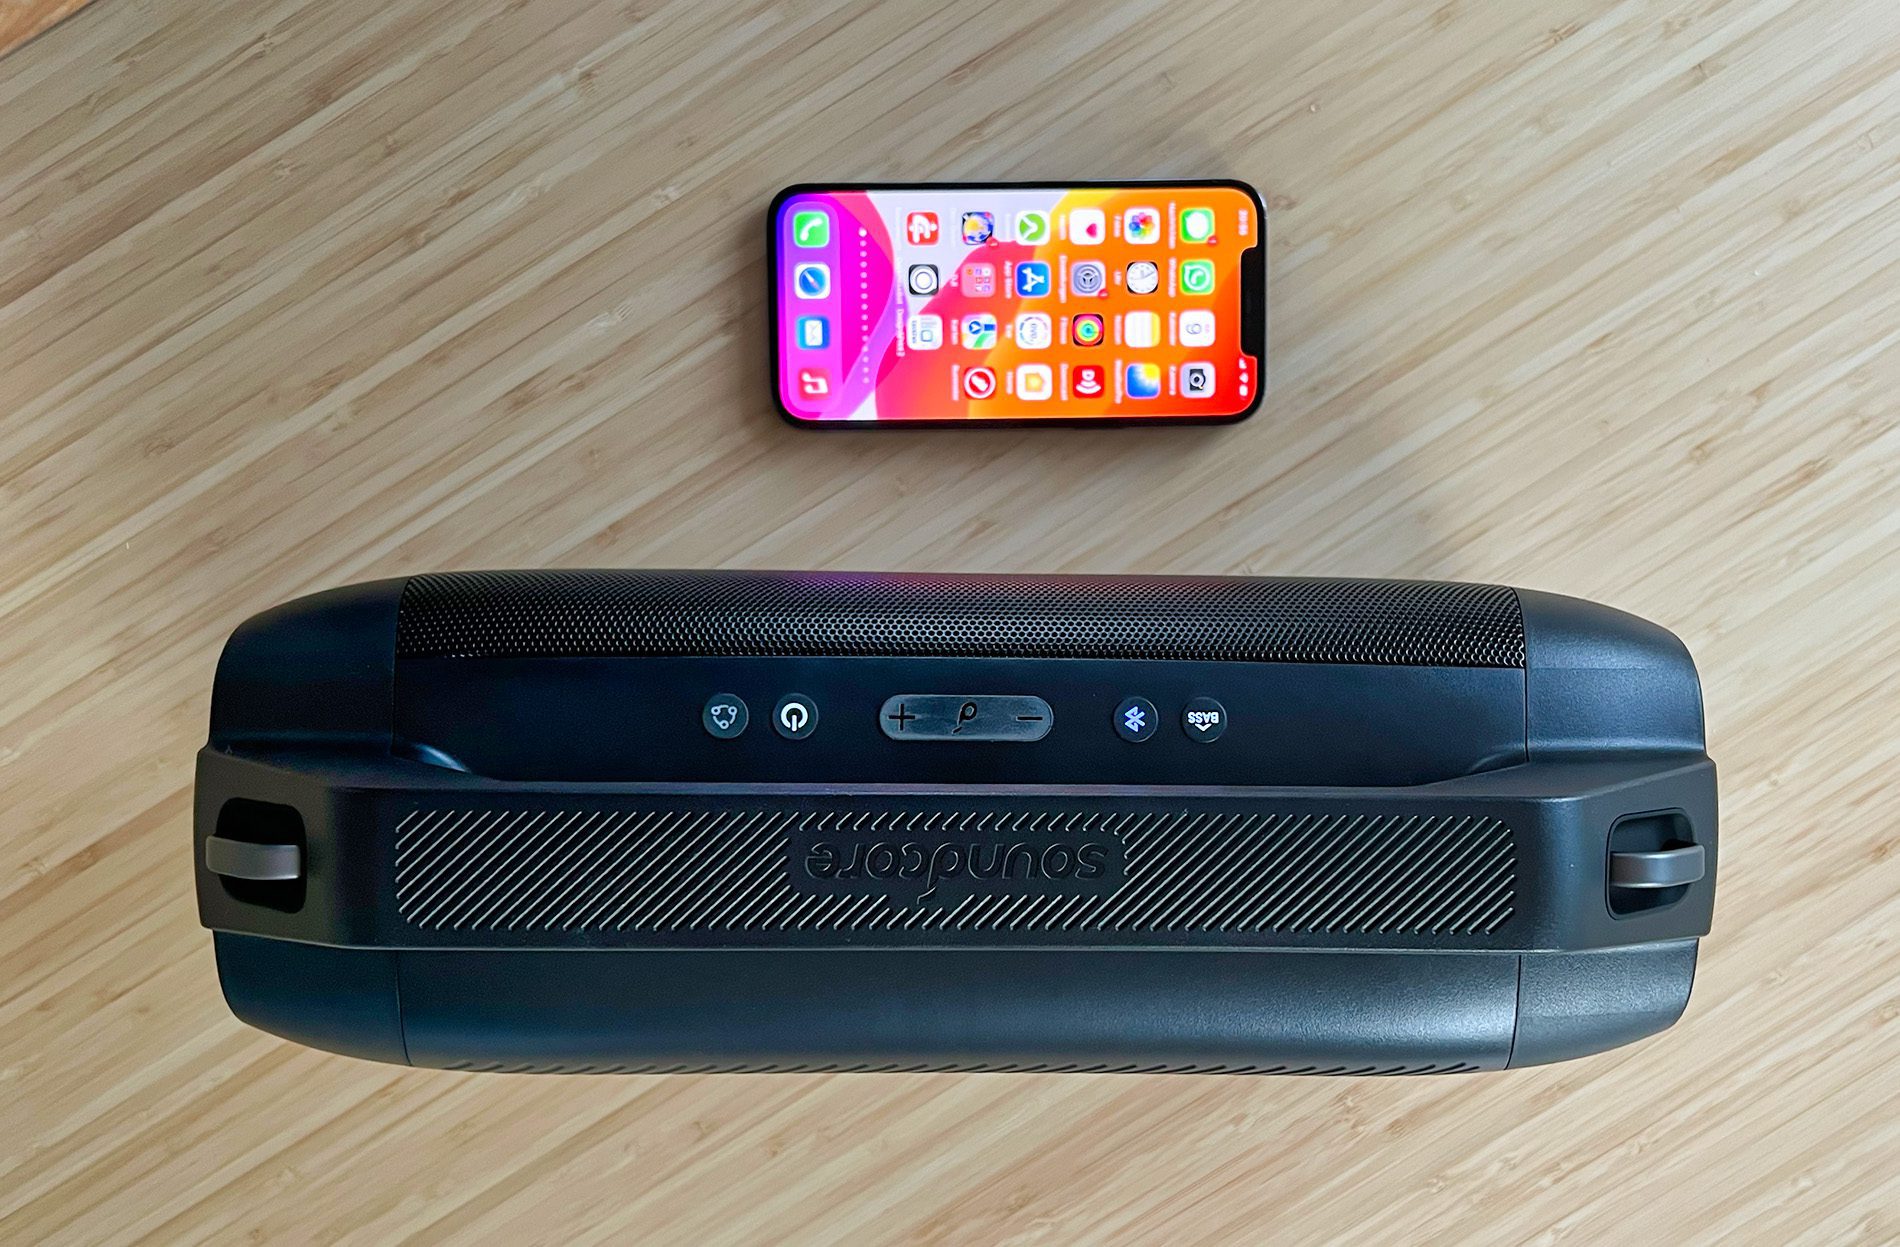 Here you can see the SOiundcore speaker in size comparison to the iPhone 12 Pro Max.